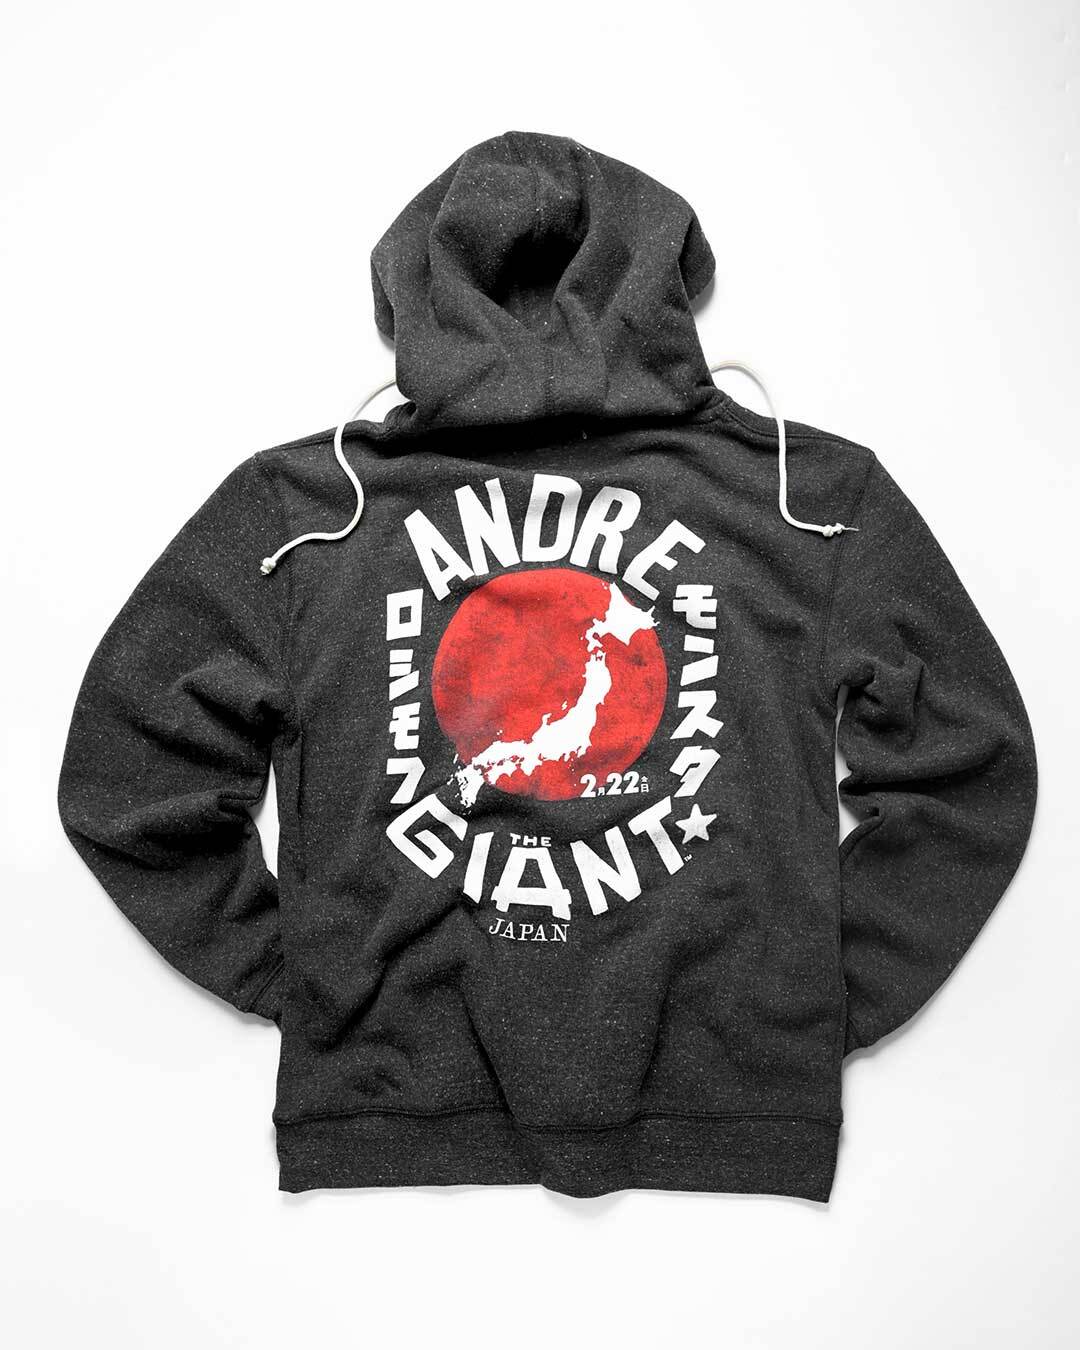 Andre the Giant Japan Black PO Hoody - Roots of Fight